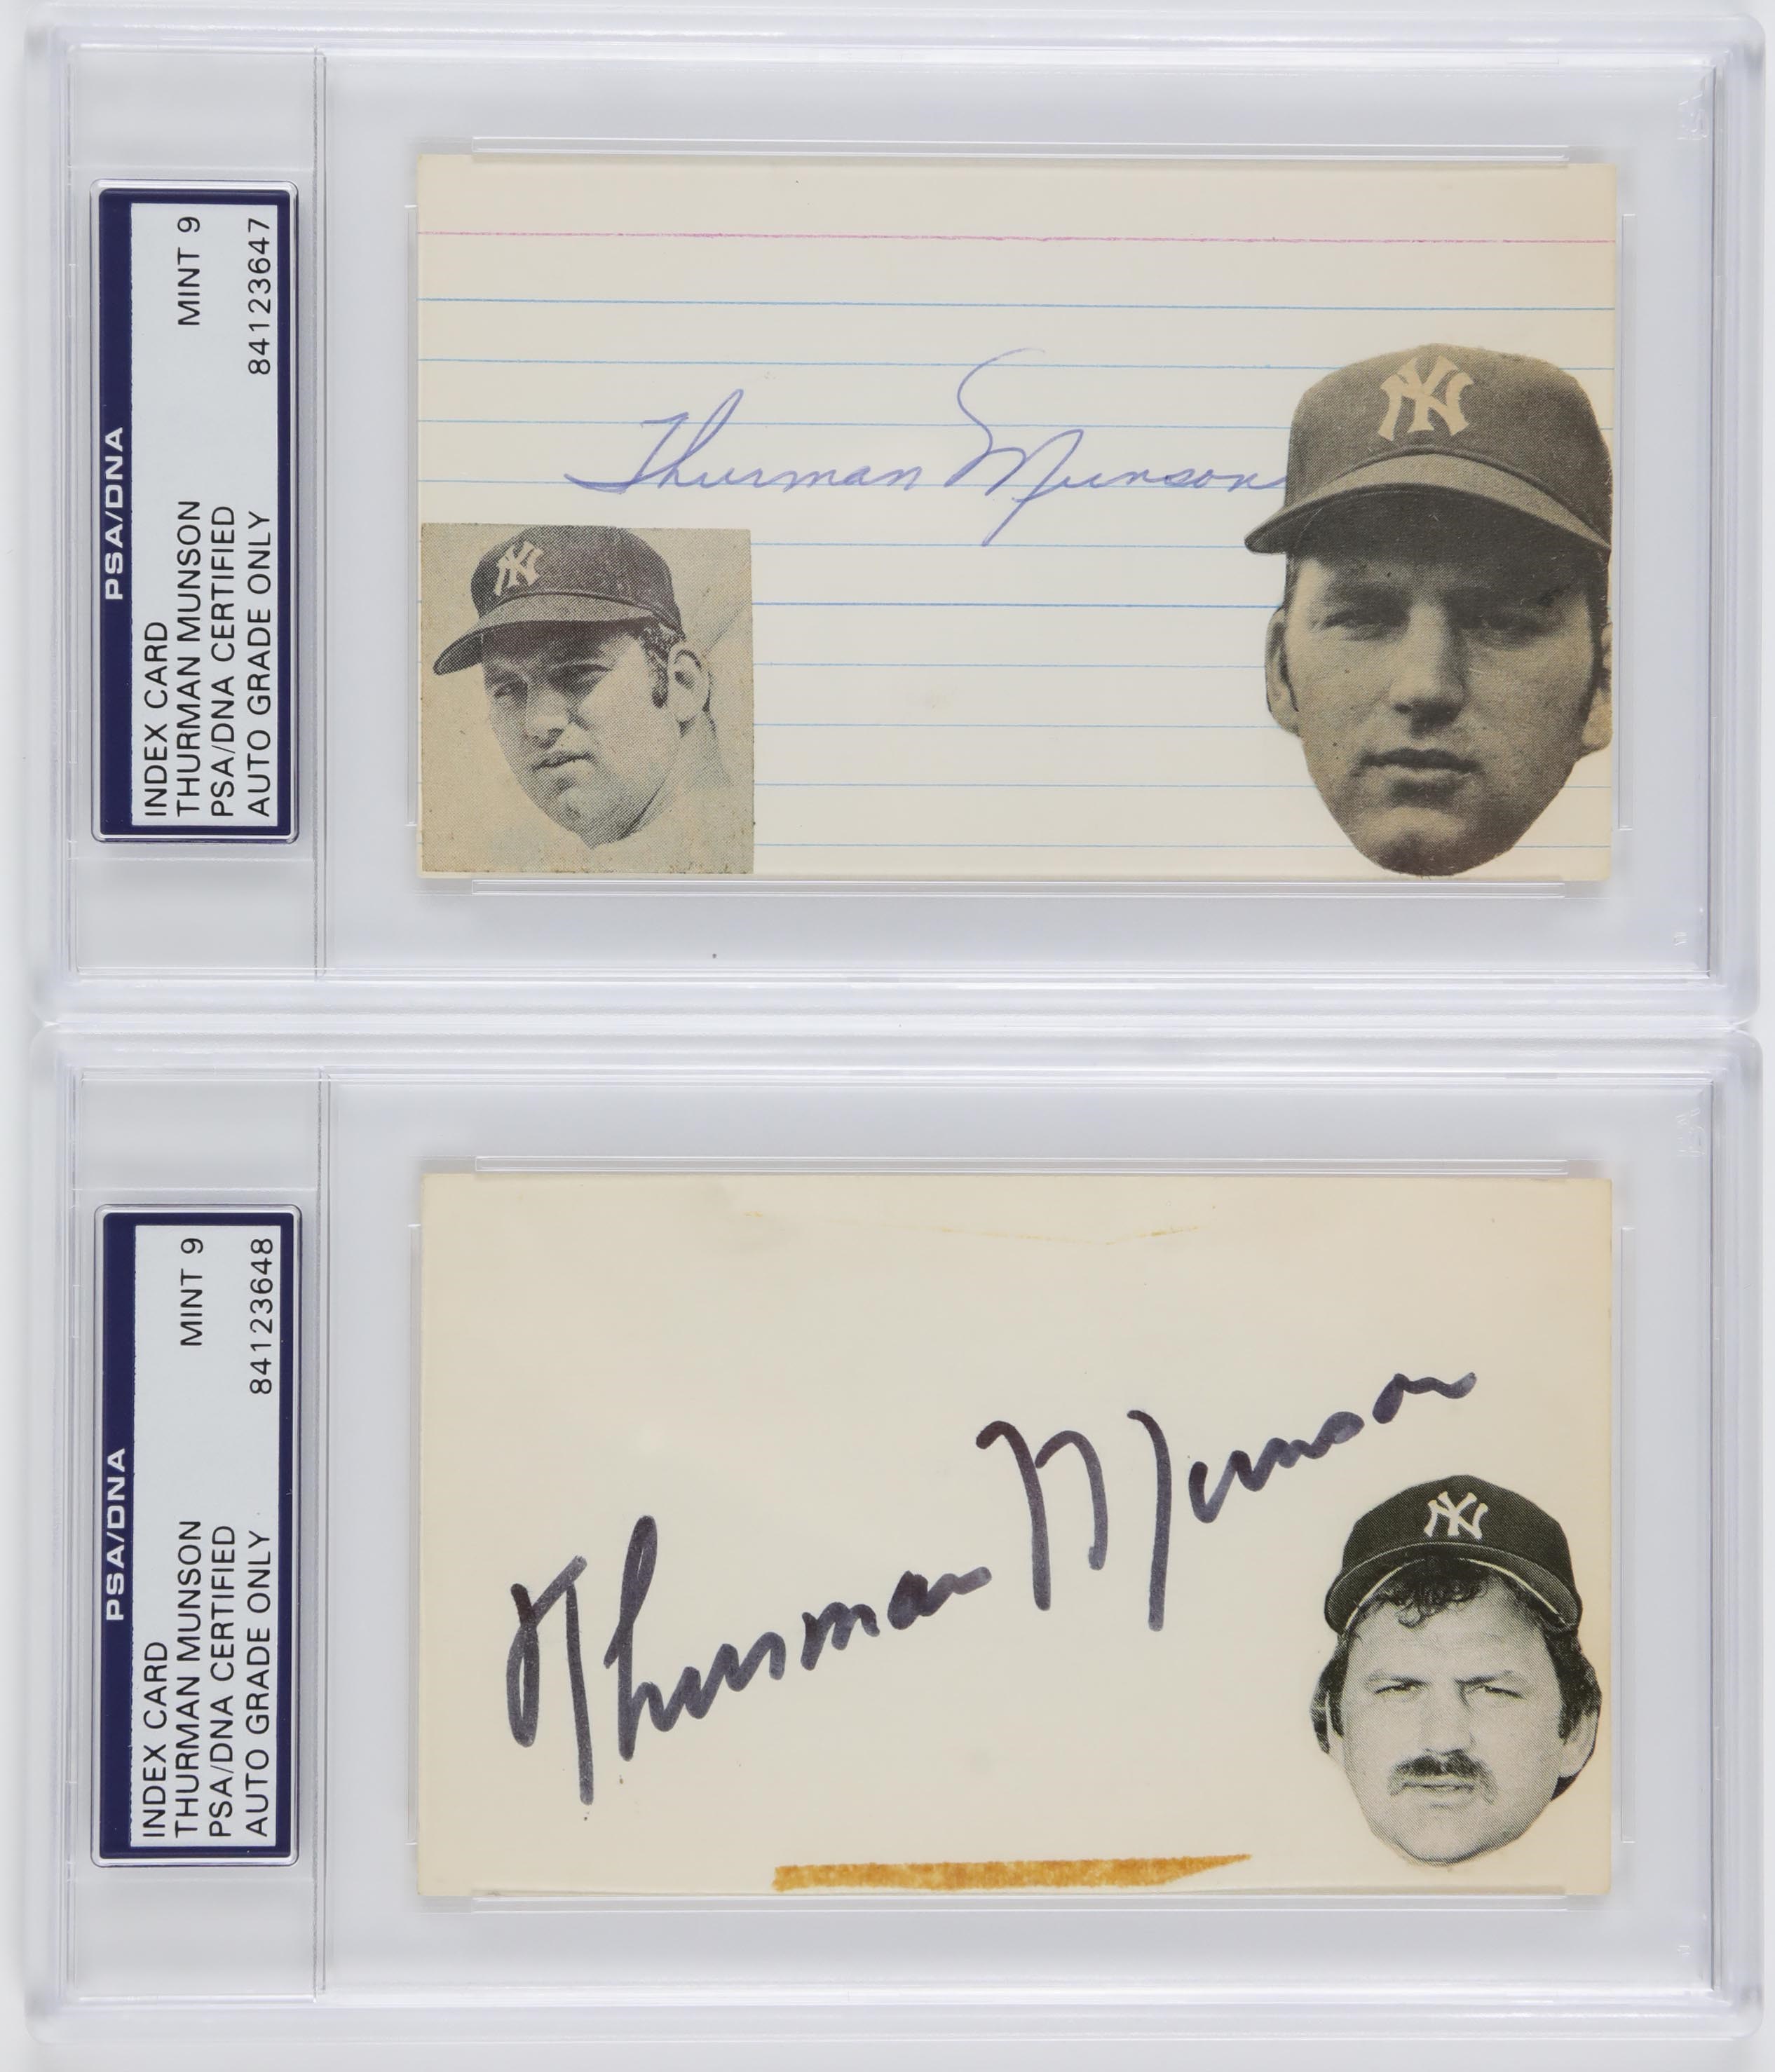 NY Yankees, Giants & Mets - Pair of Thurman Munson Signed Index Cards ( Both PSA MINT 9)